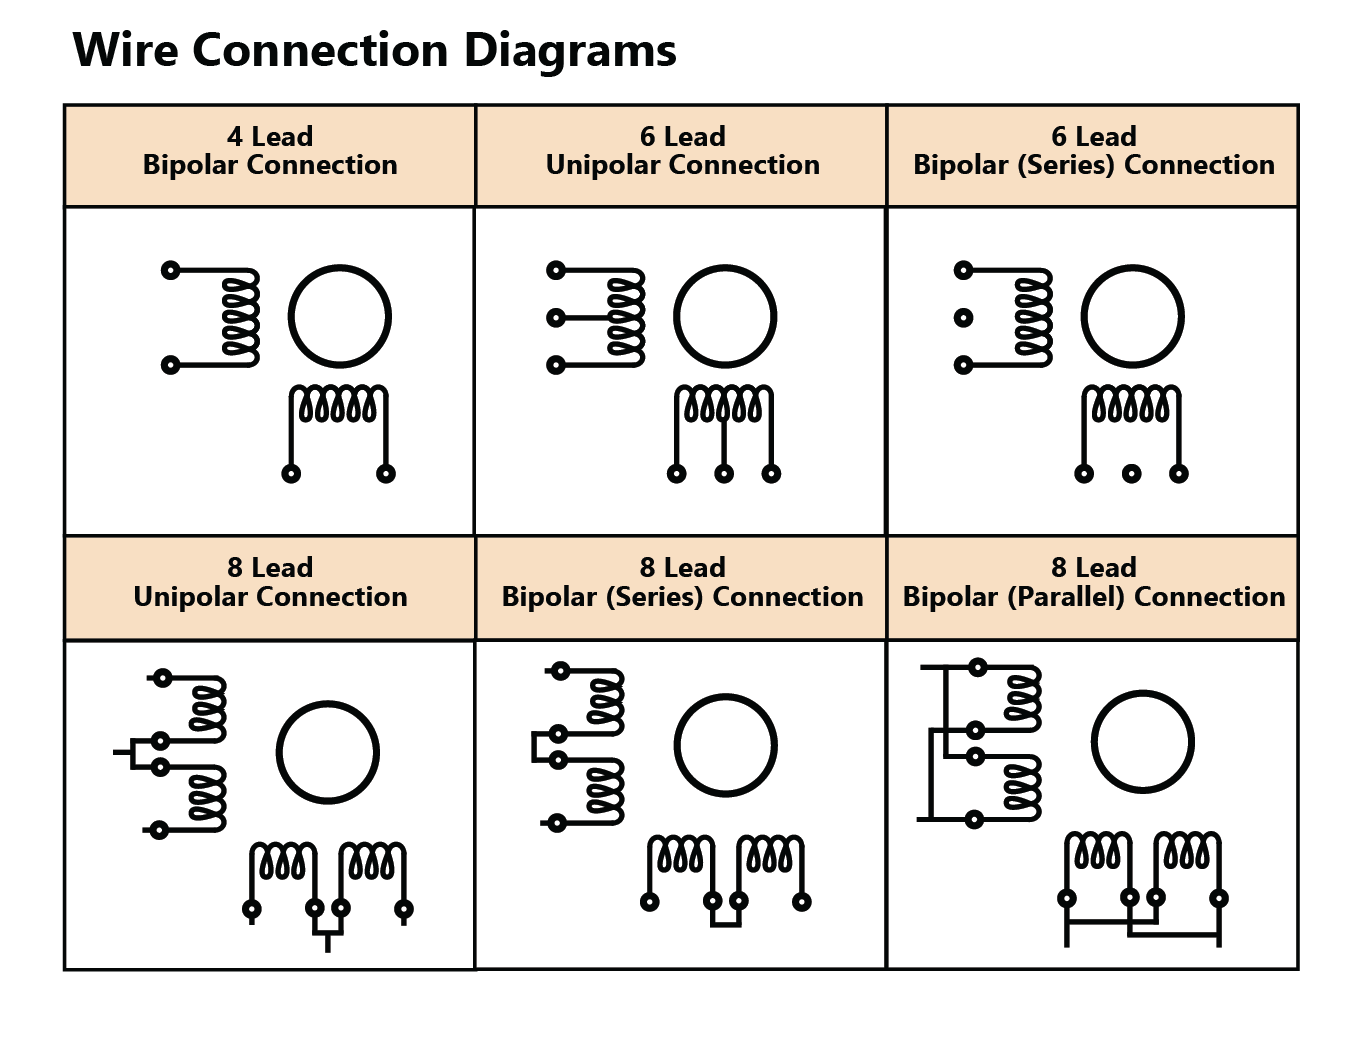 https://lin-cms-images.s3.us-west-2.amazonaws.com/Hybrid_stepper_motor_wire_connection_diagram_20a653adbe.png